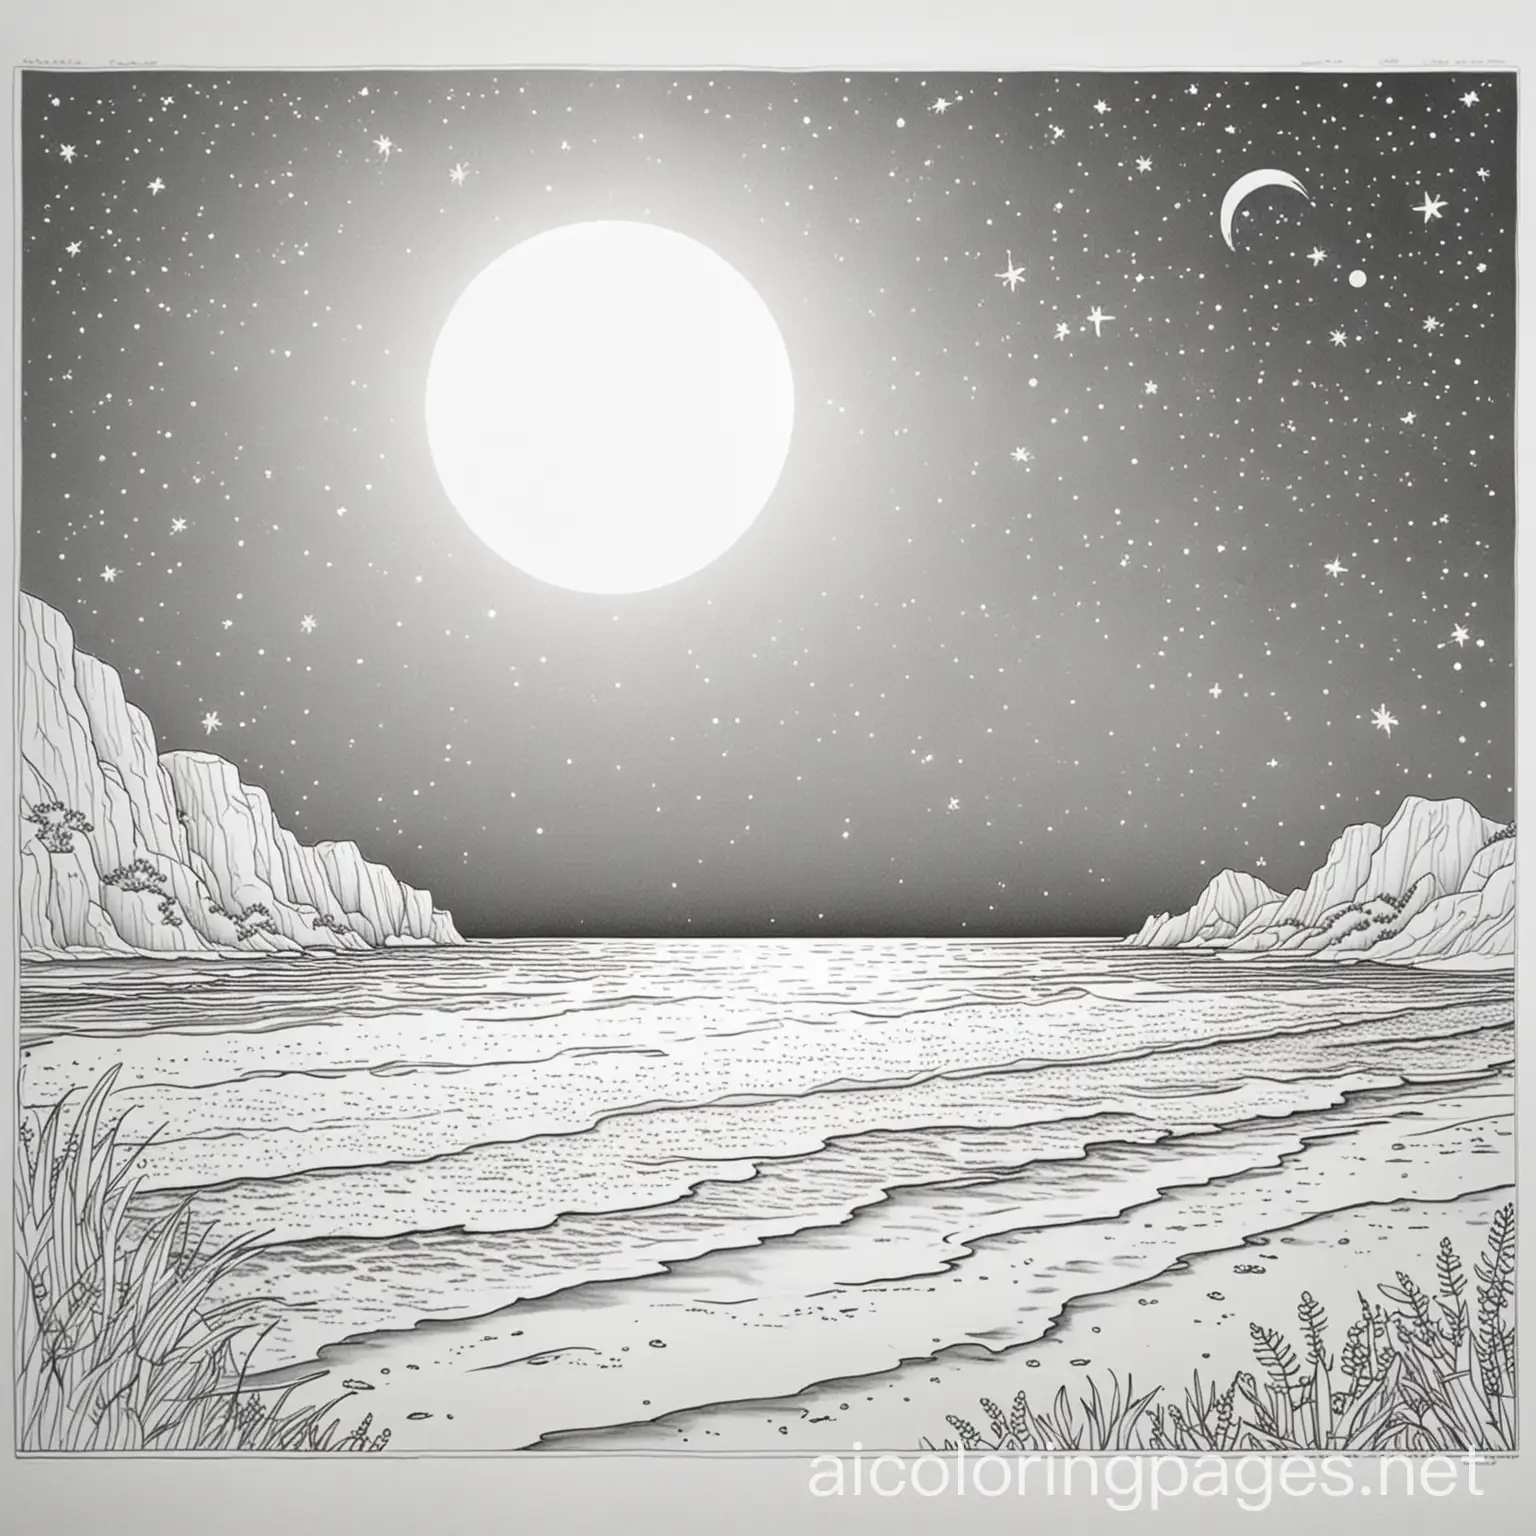 stars in the sky with a moon and beach, Coloring Page, black and white, line art, white background, Simplicity, Ample White Space. The background of the coloring page is plain white to make it easy for young children to color within the lines. The outlines of all the subjects are easy to distinguish, making it simple for kids to color without too much difficulty